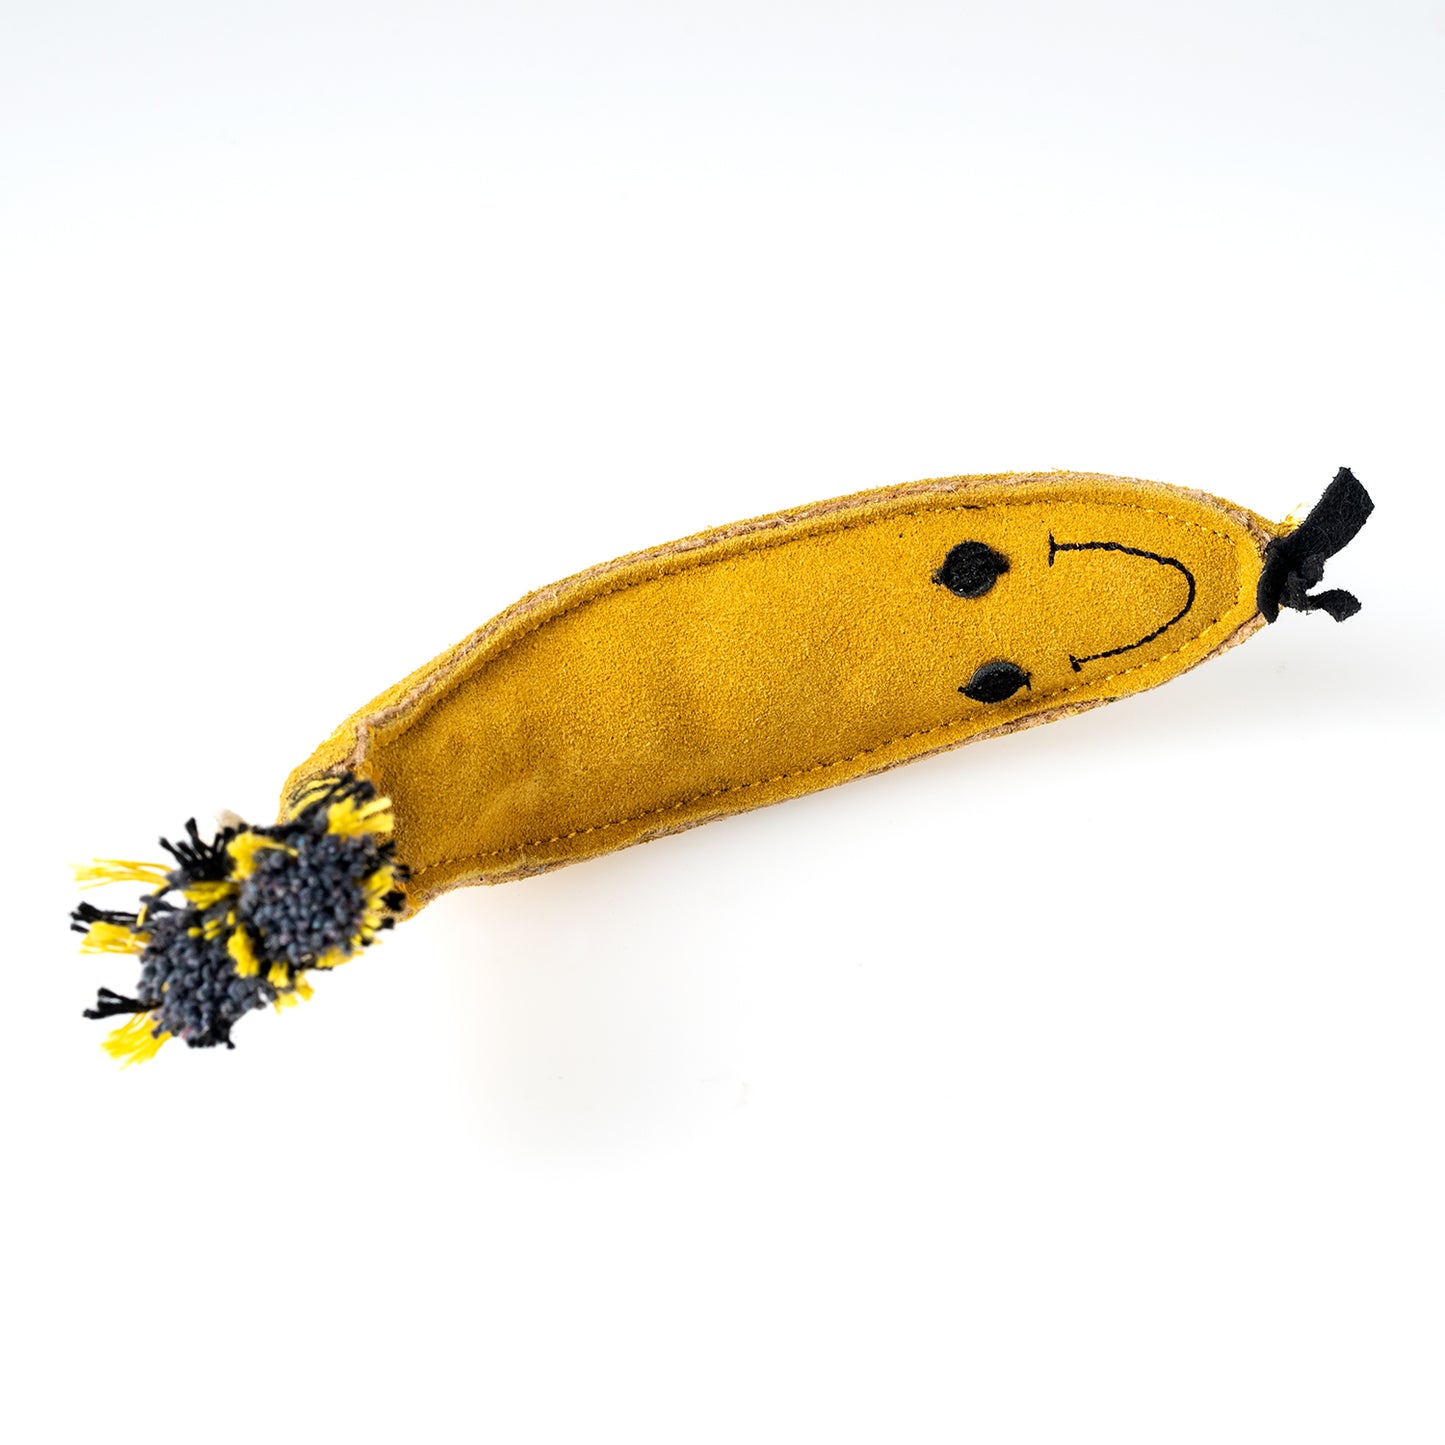 Barry the Banana Eco-Friendly Toy for Dogs - 100% Natural, Renewable & Recyclable Materials